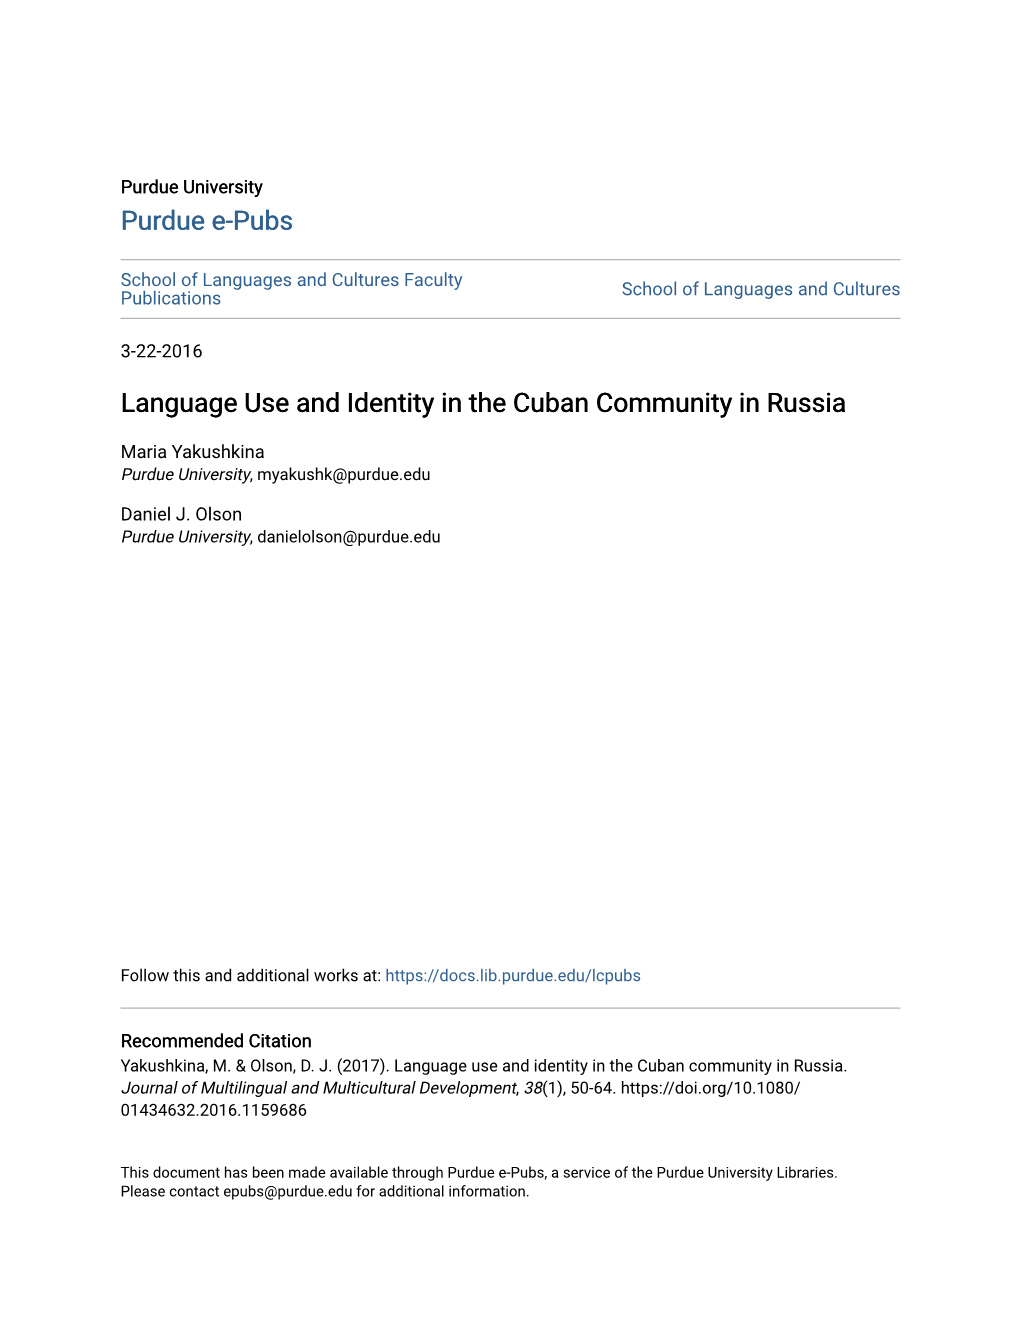 Language Use and Identity in the Cuban Community in Russia